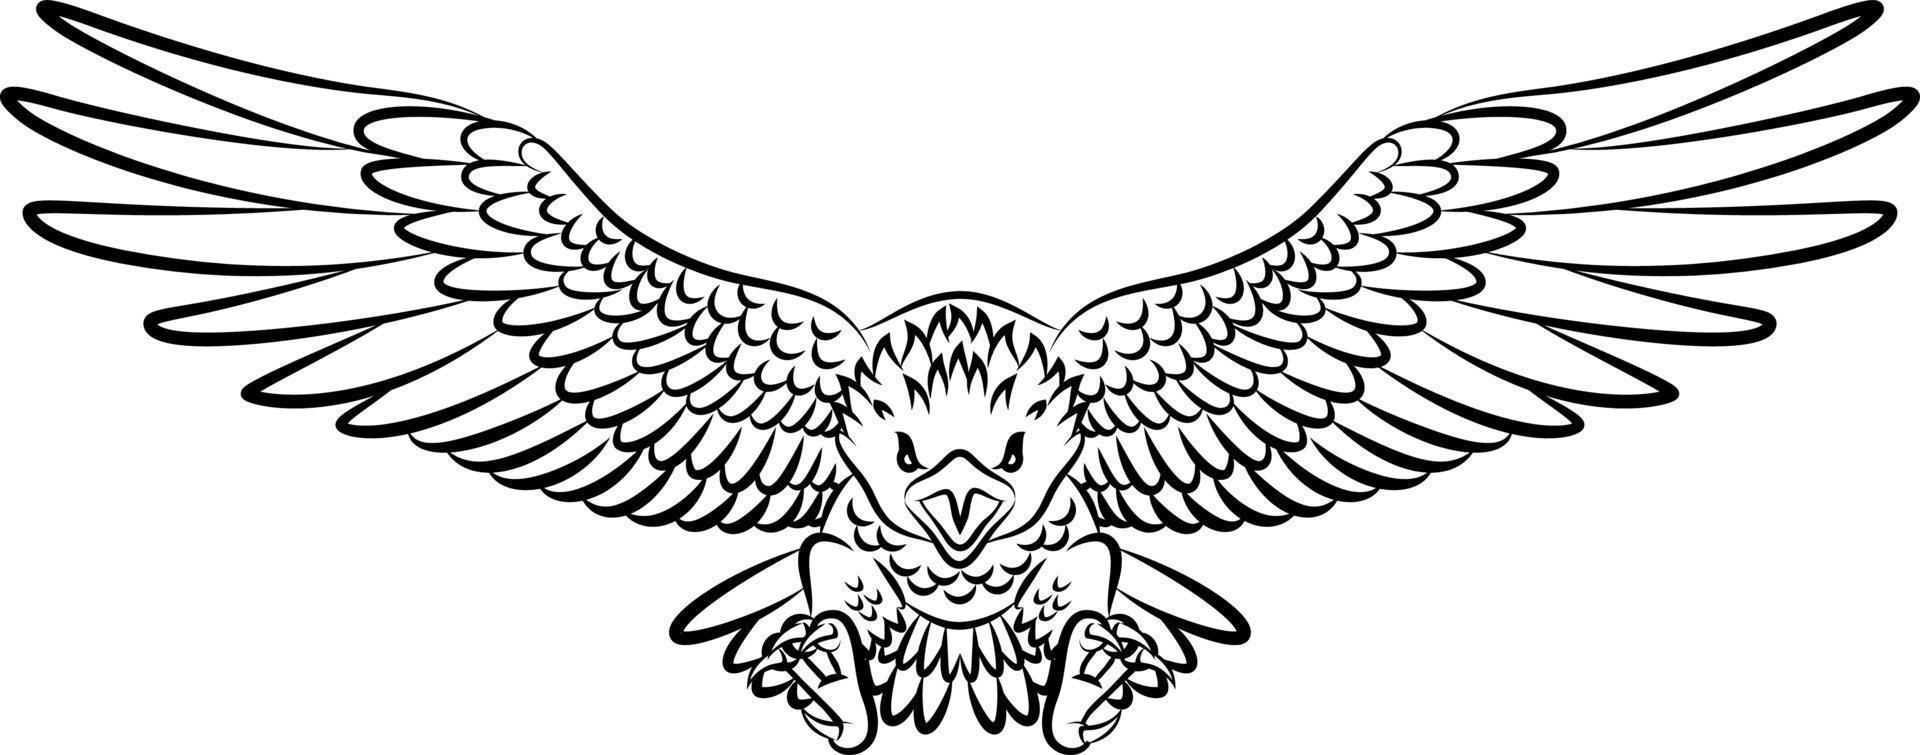 Tribal eagle tattoo isolated on white background vector